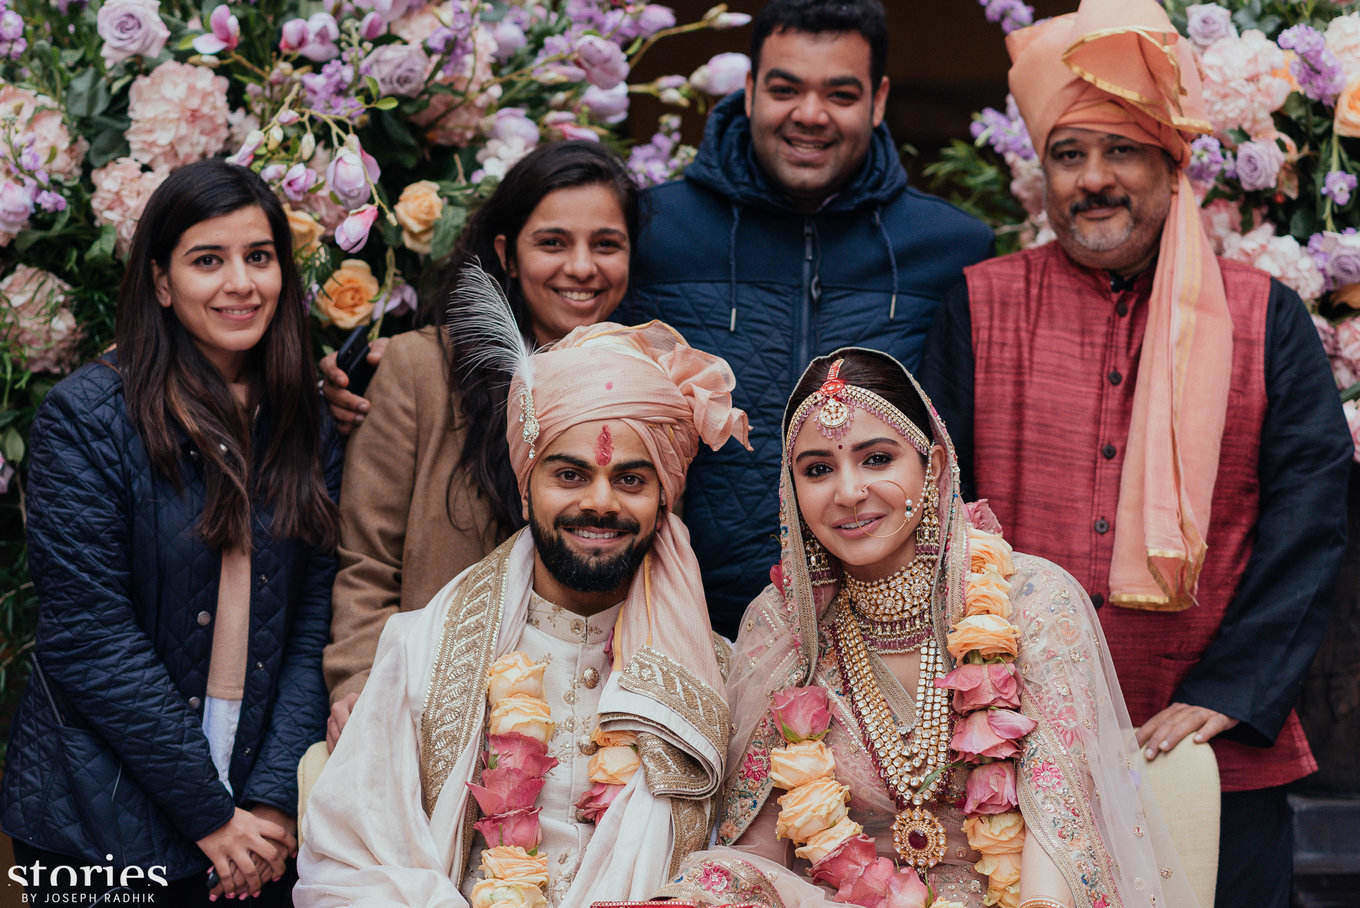 ‘I Do’: How Indian Couples Today Are Tying The Knot With Wedding Tech Startups